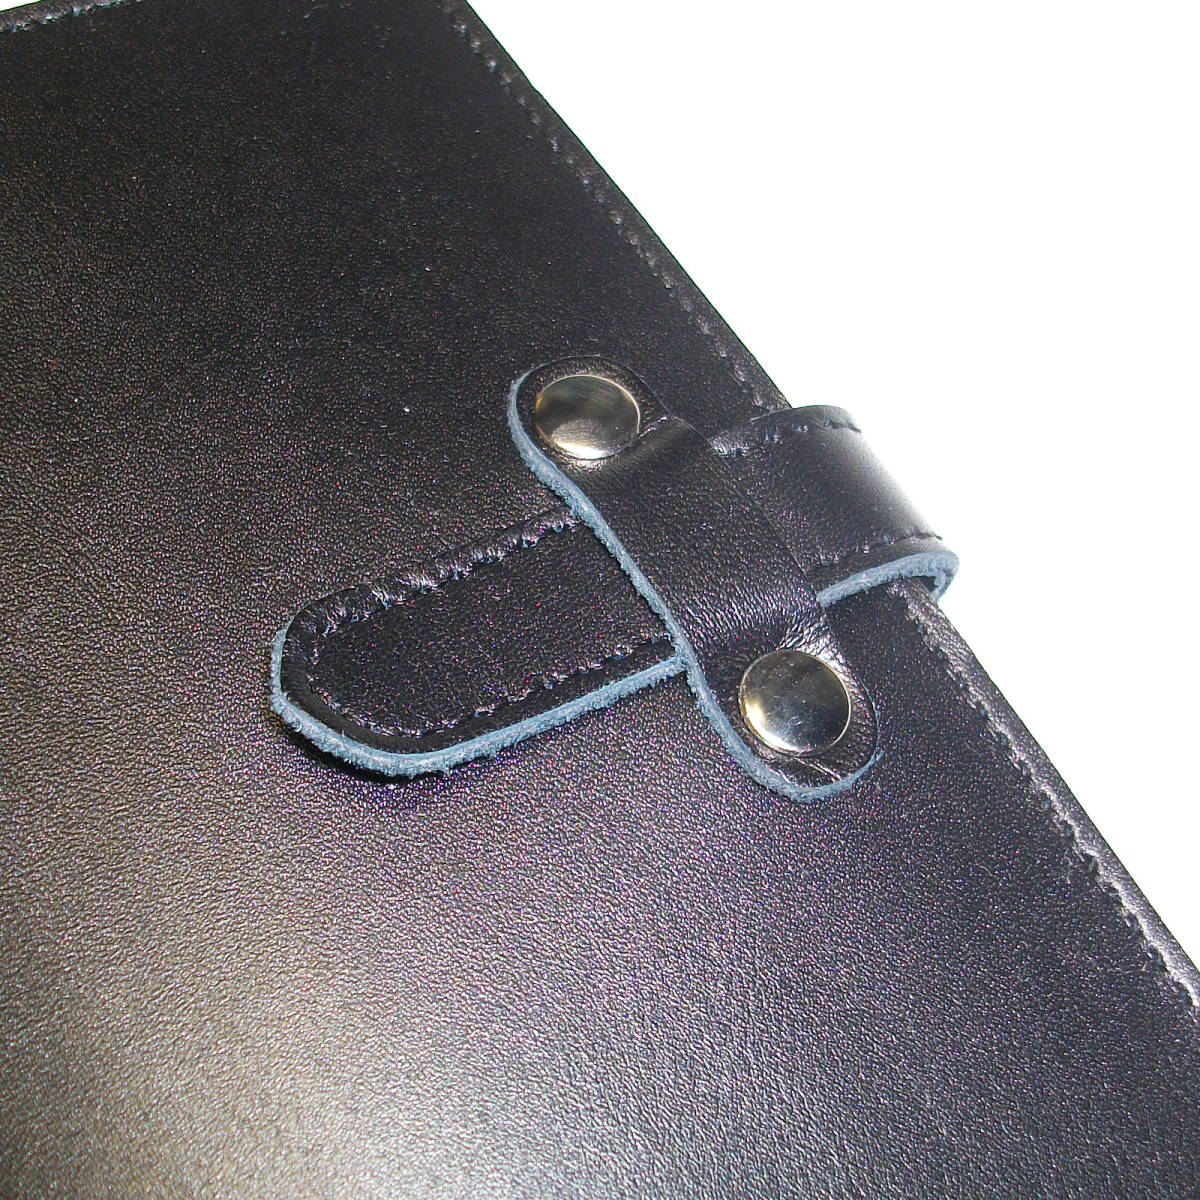  original leather book cover black black library book@A6 leather leather cow leather library book@ size almost day pocketbook cover hand made made in Japan [ leather atelier satou]